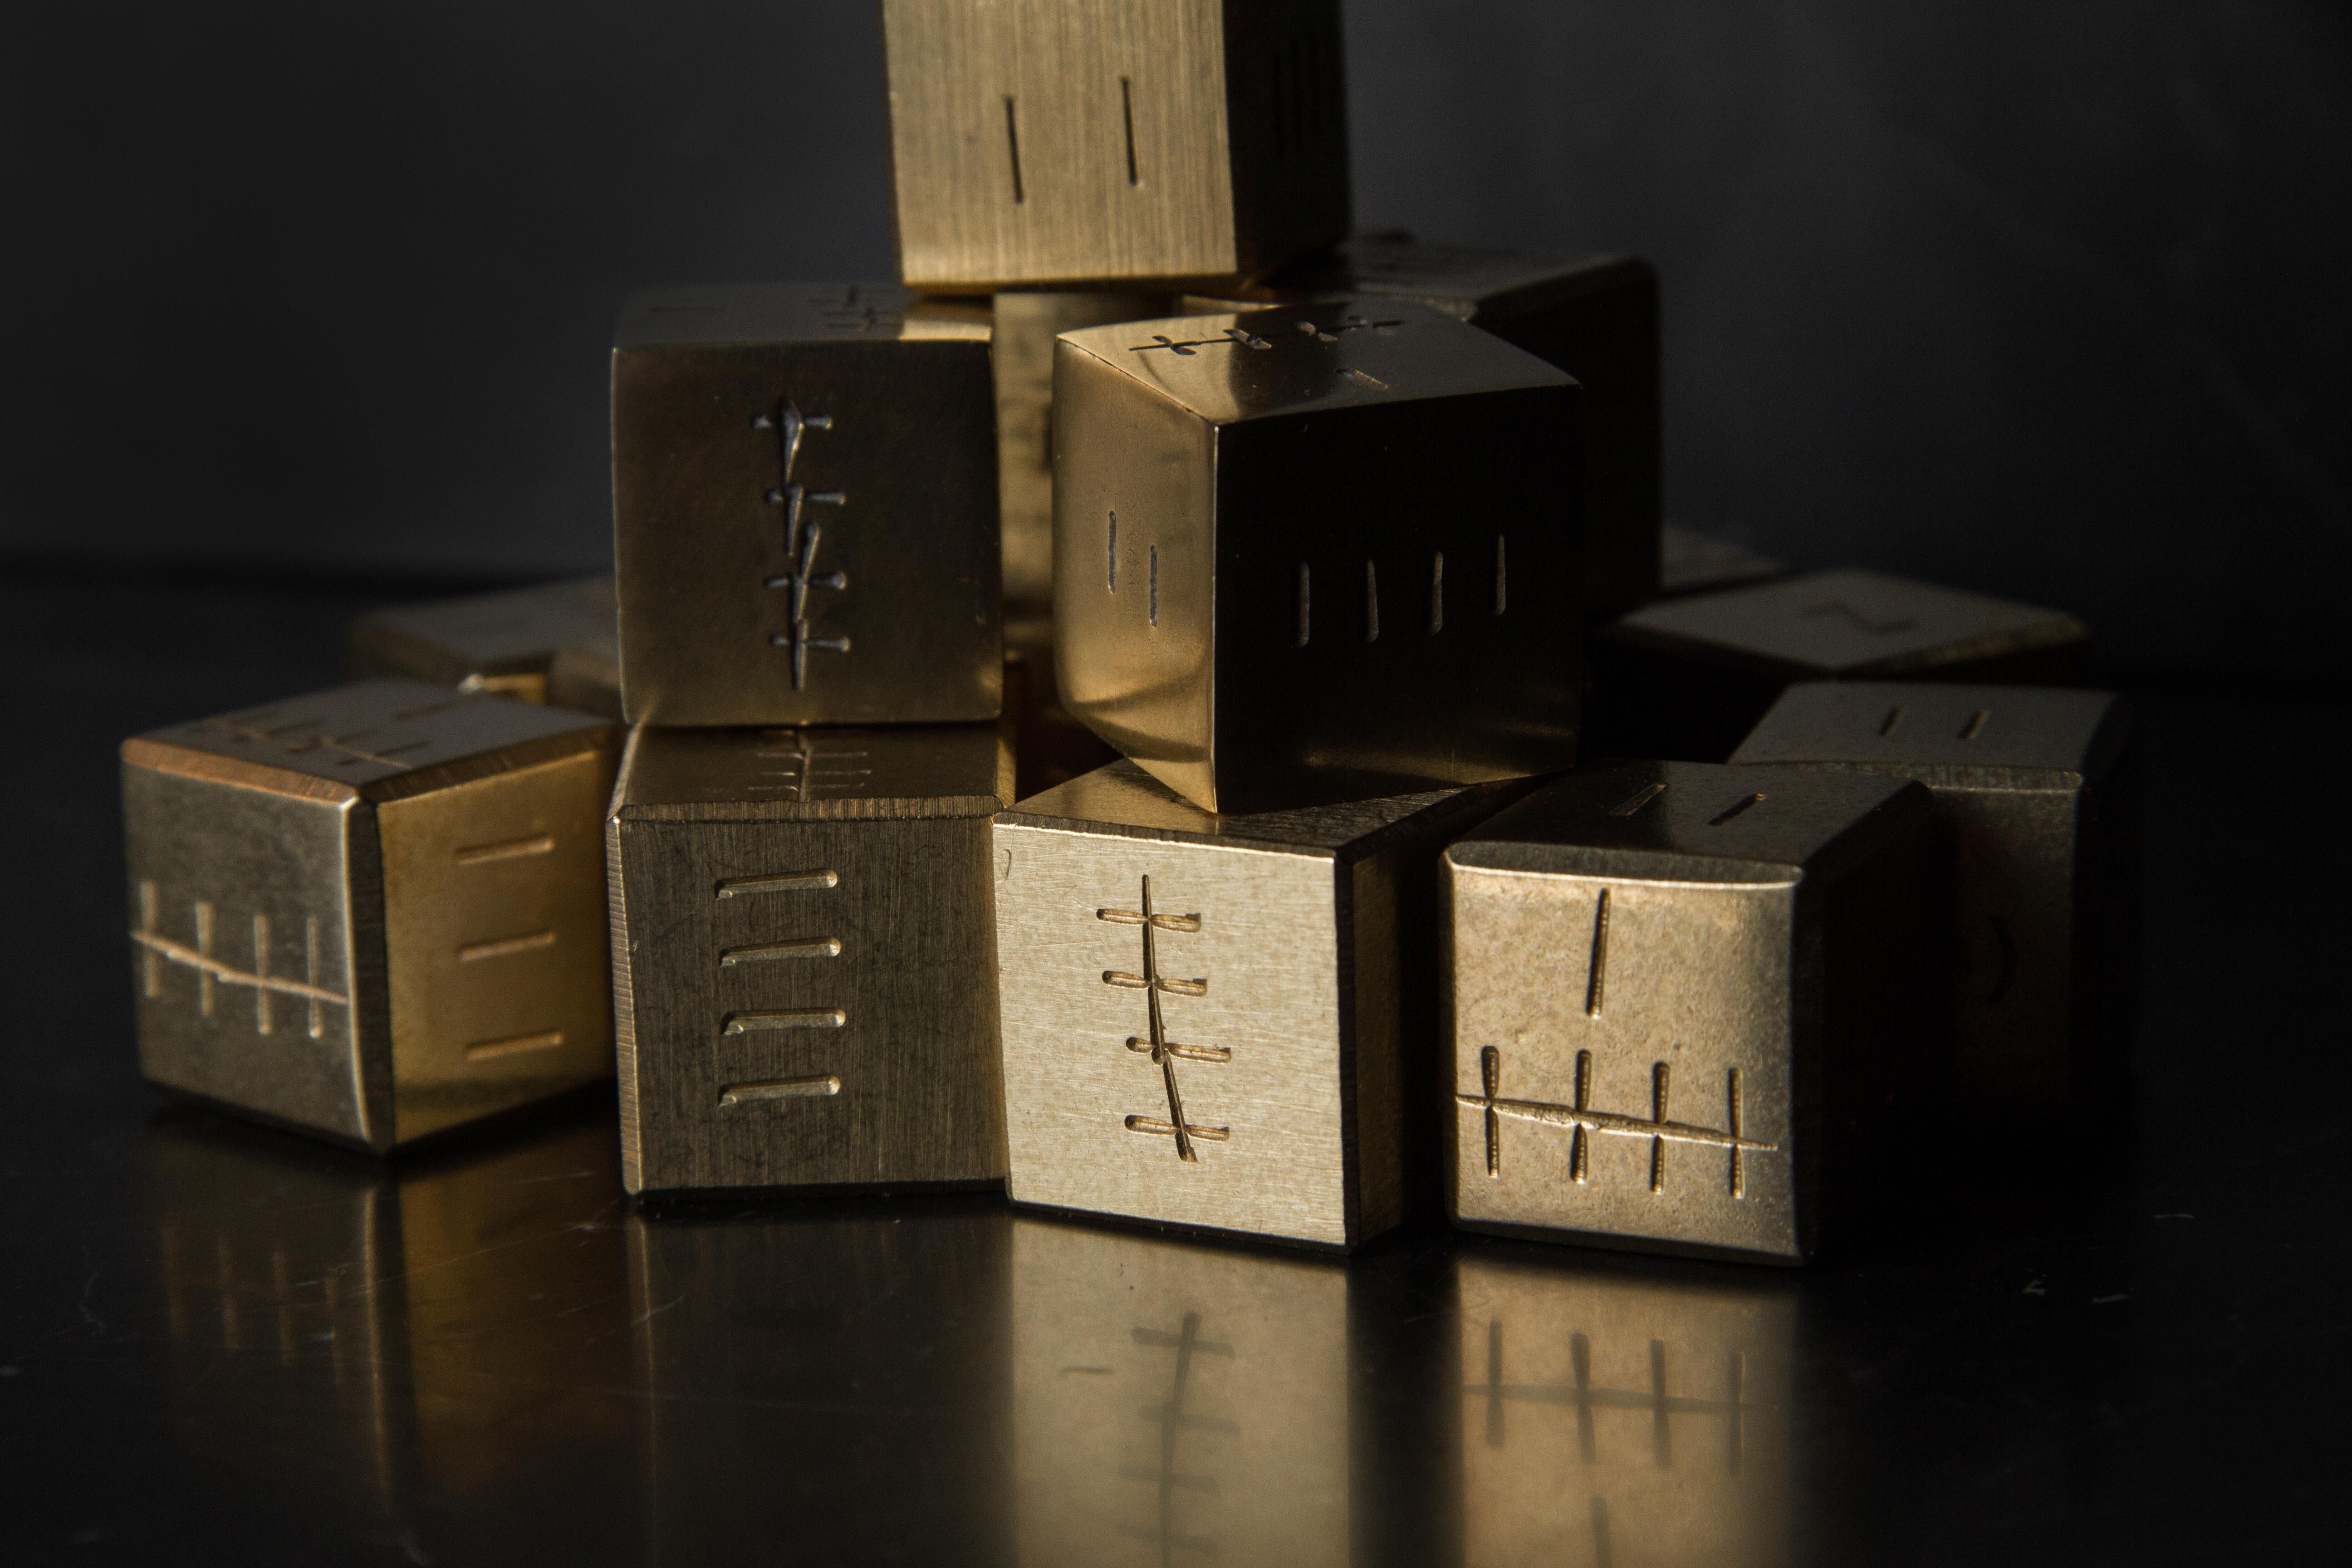 The (wh)ORE HAüS STUDIOS small goods collection was made for those that wanted to experience the (wh)ORE HAüS brand without committing to our larger pieces. The brass dice are made of solid brass and hand stamped. We also offer custom complementary